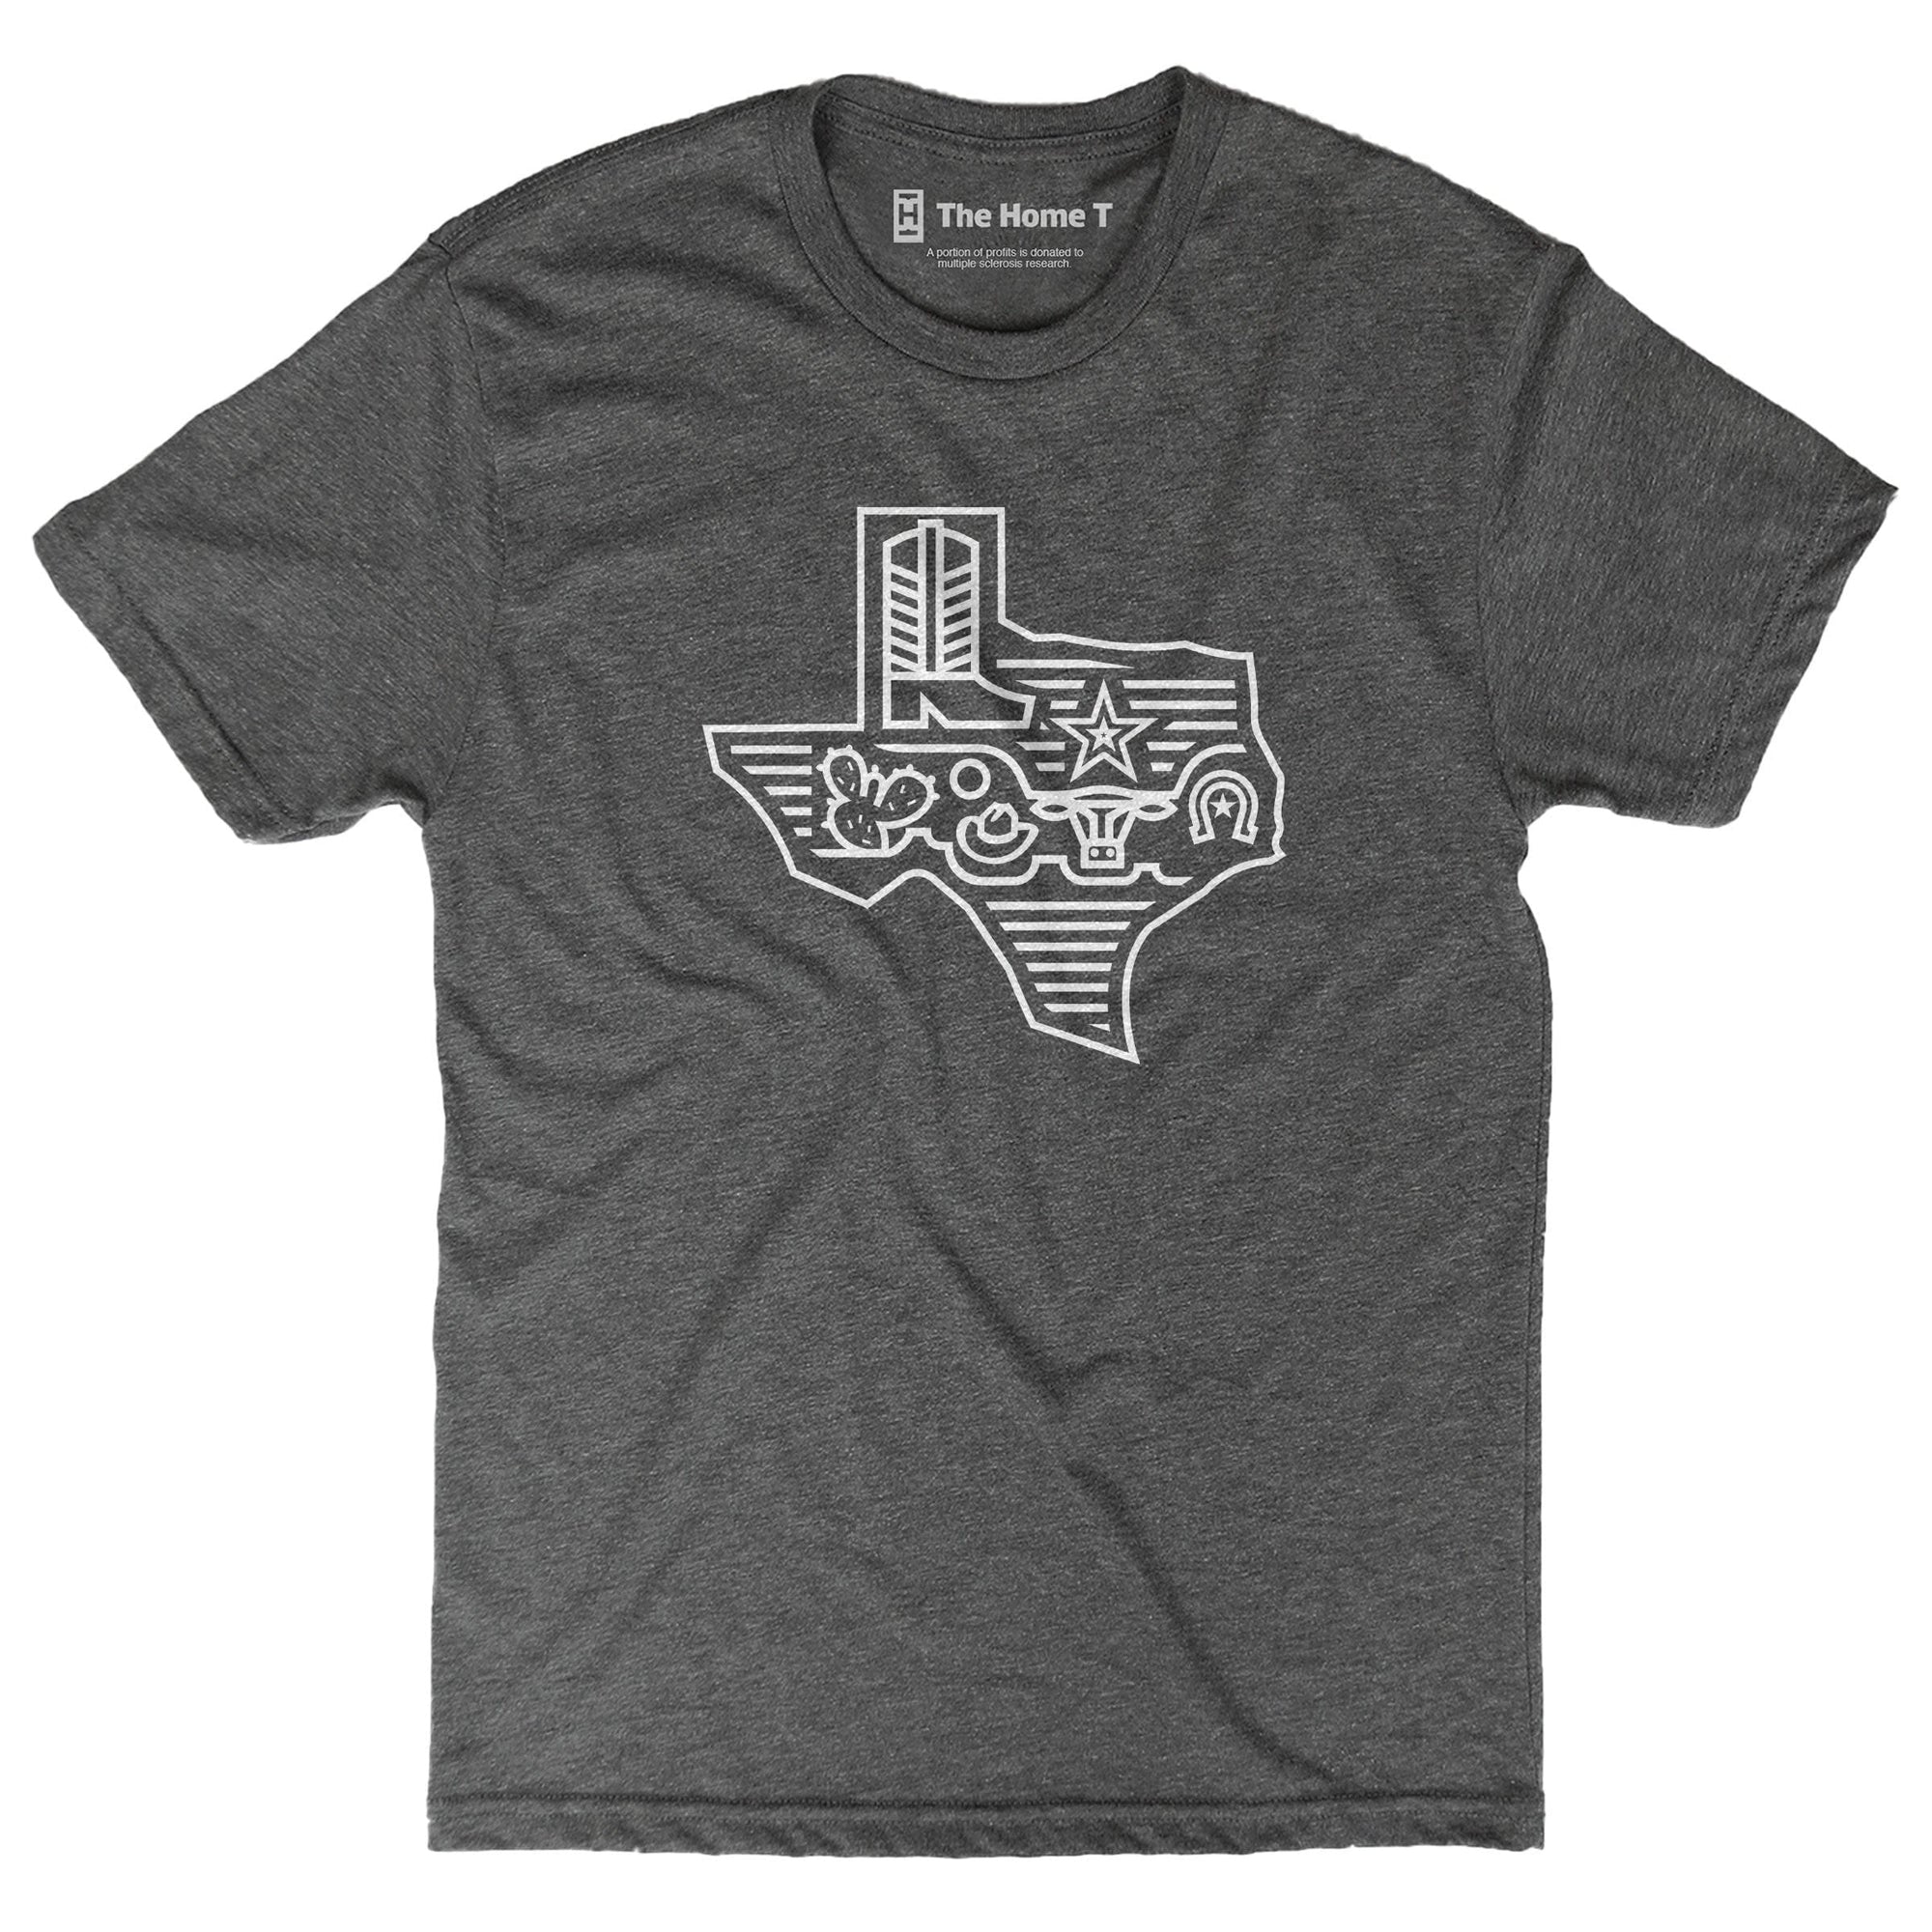 Texas Clothing & Apparel - The Home T